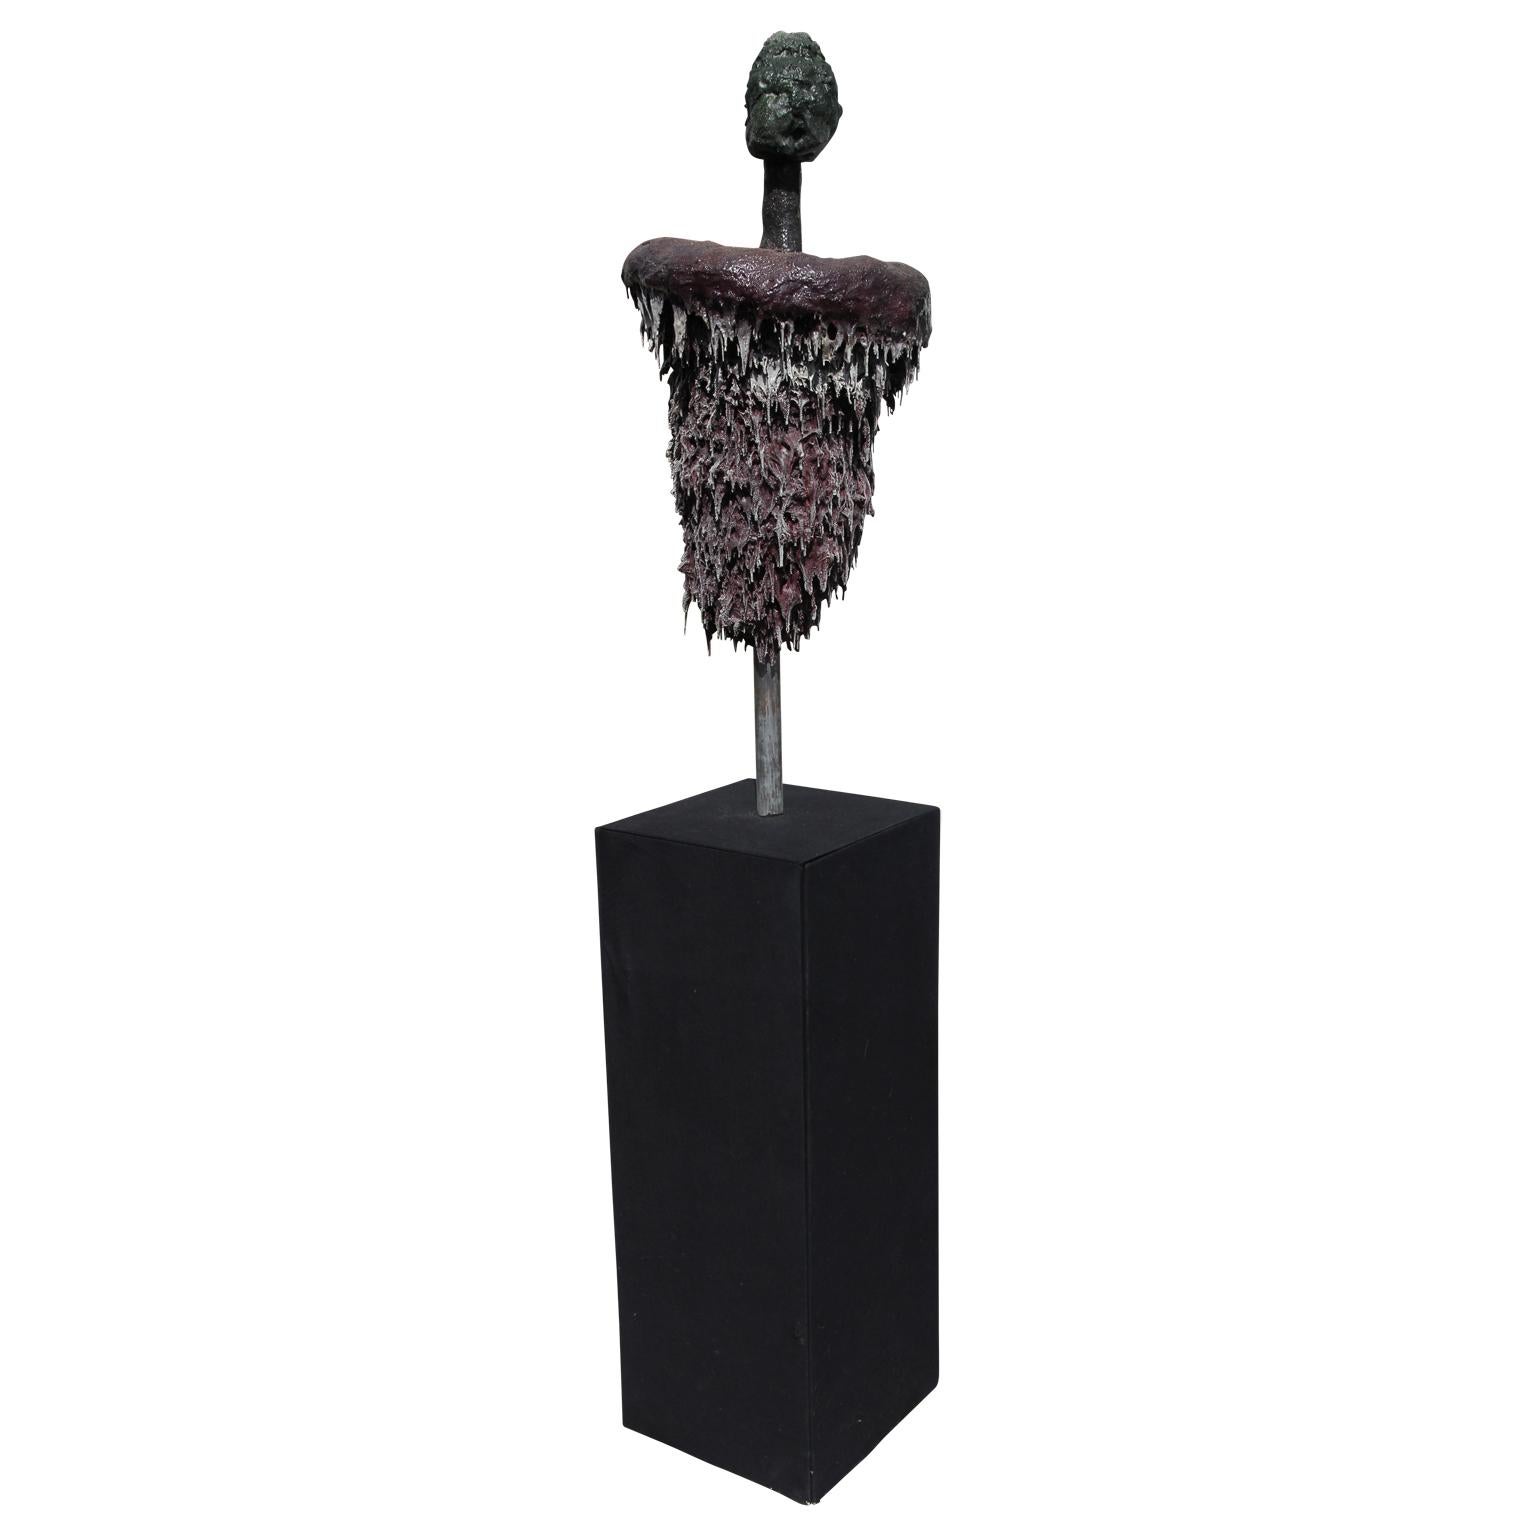 Patrick McSwain Abstract Sculpture - “Ballast for Memory” Dark Toned Avant-Garde Heavily Textured Clay Sculpture